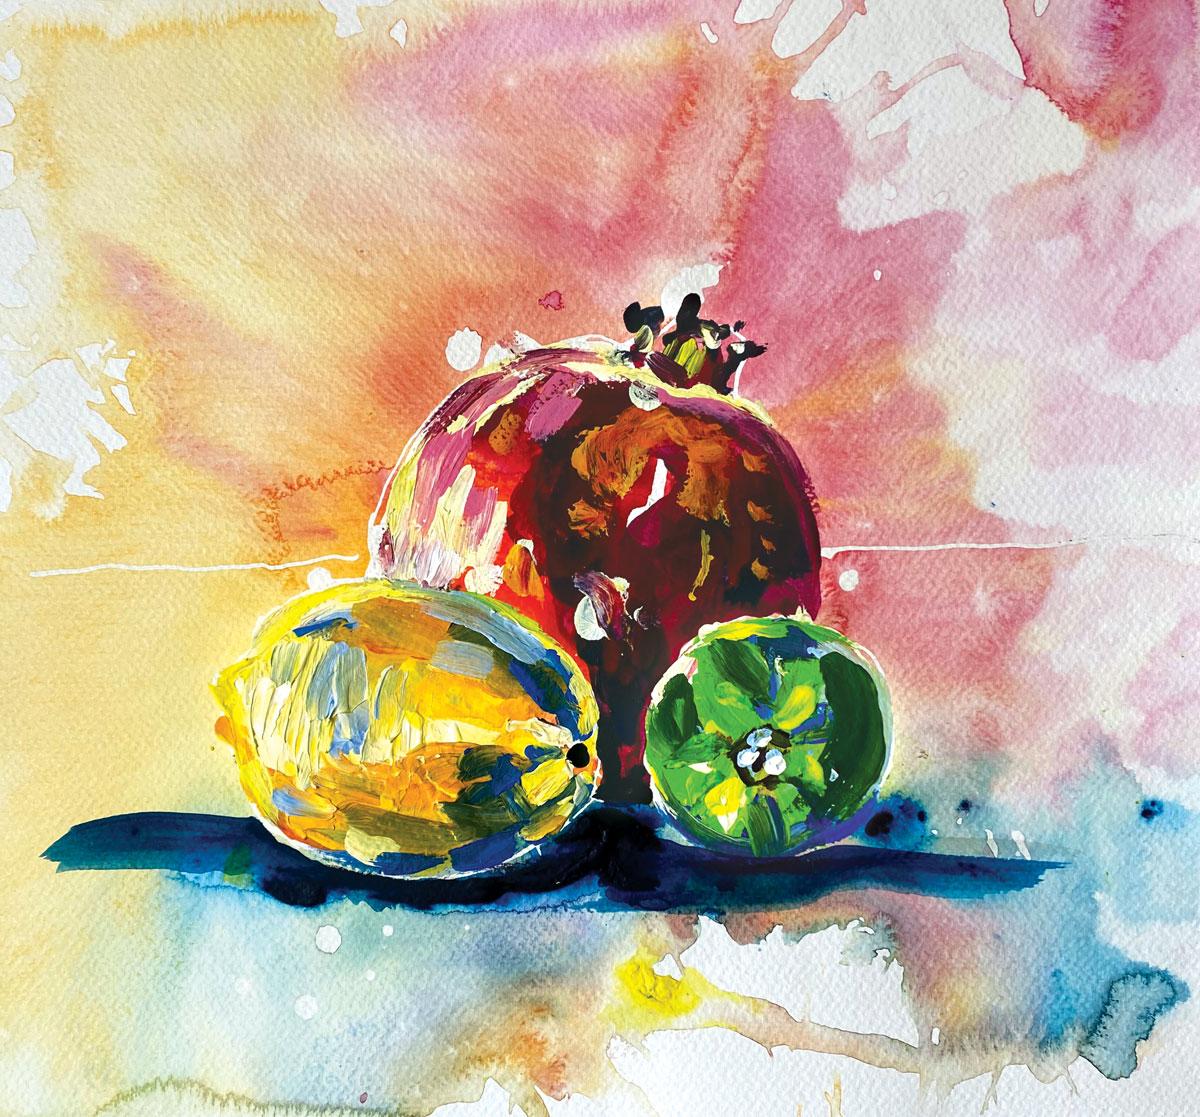 Fruit series #3 by Rachael Dalzell. Acrylic on paper. 